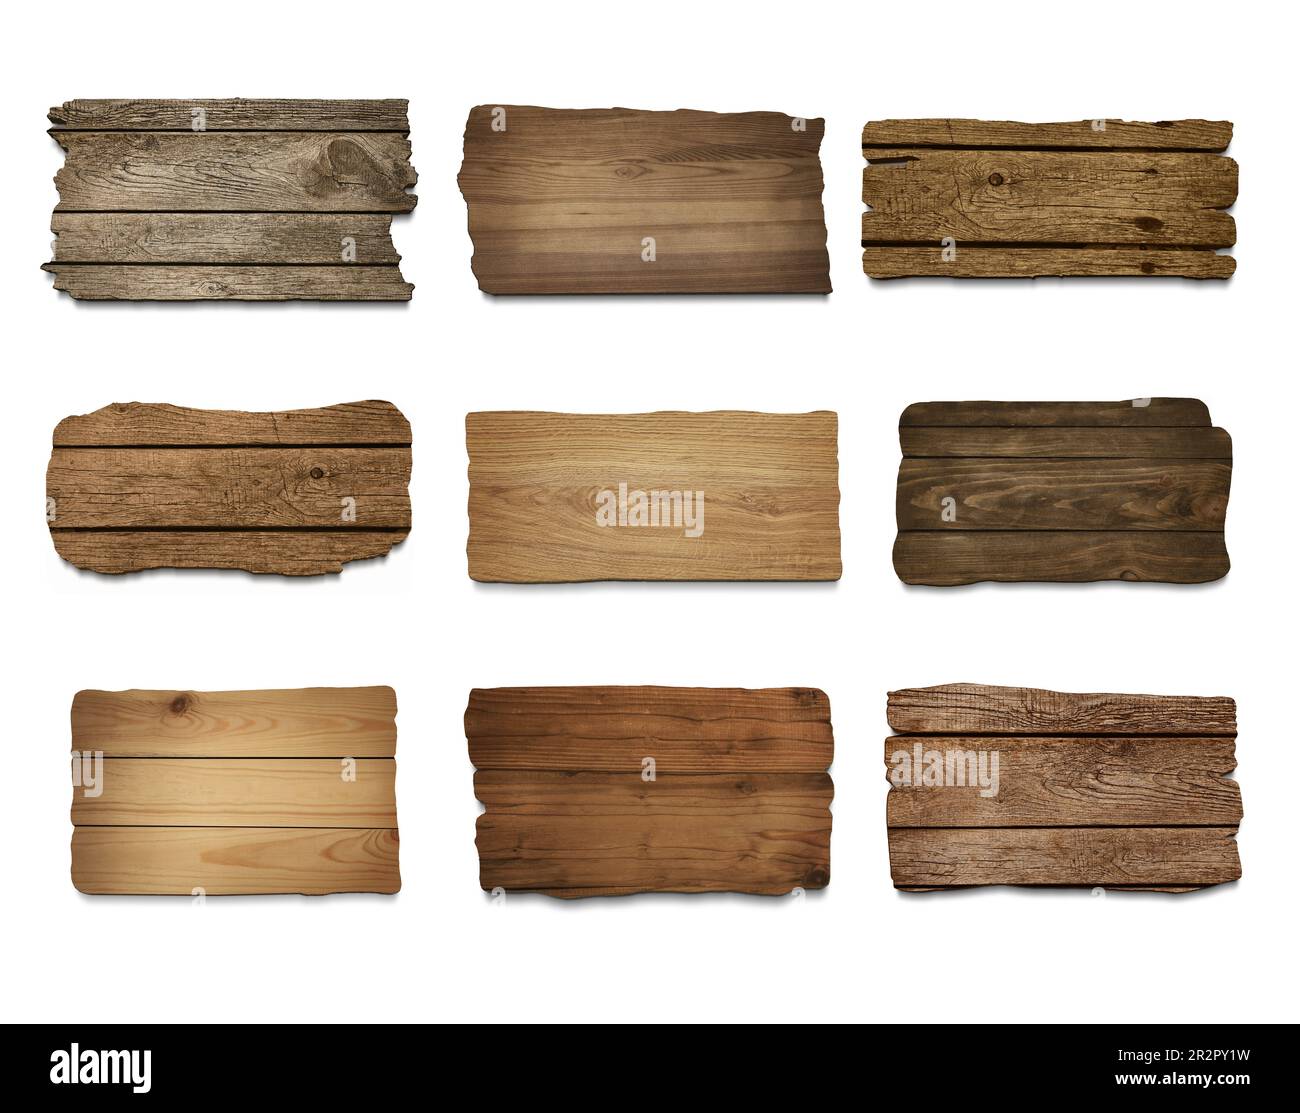 https://c8.alamy.com/comp/2R2PY1W/set-with-different-empty-wooden-boards-on-white-background-mockup-for-design-2R2PY1W.jpg